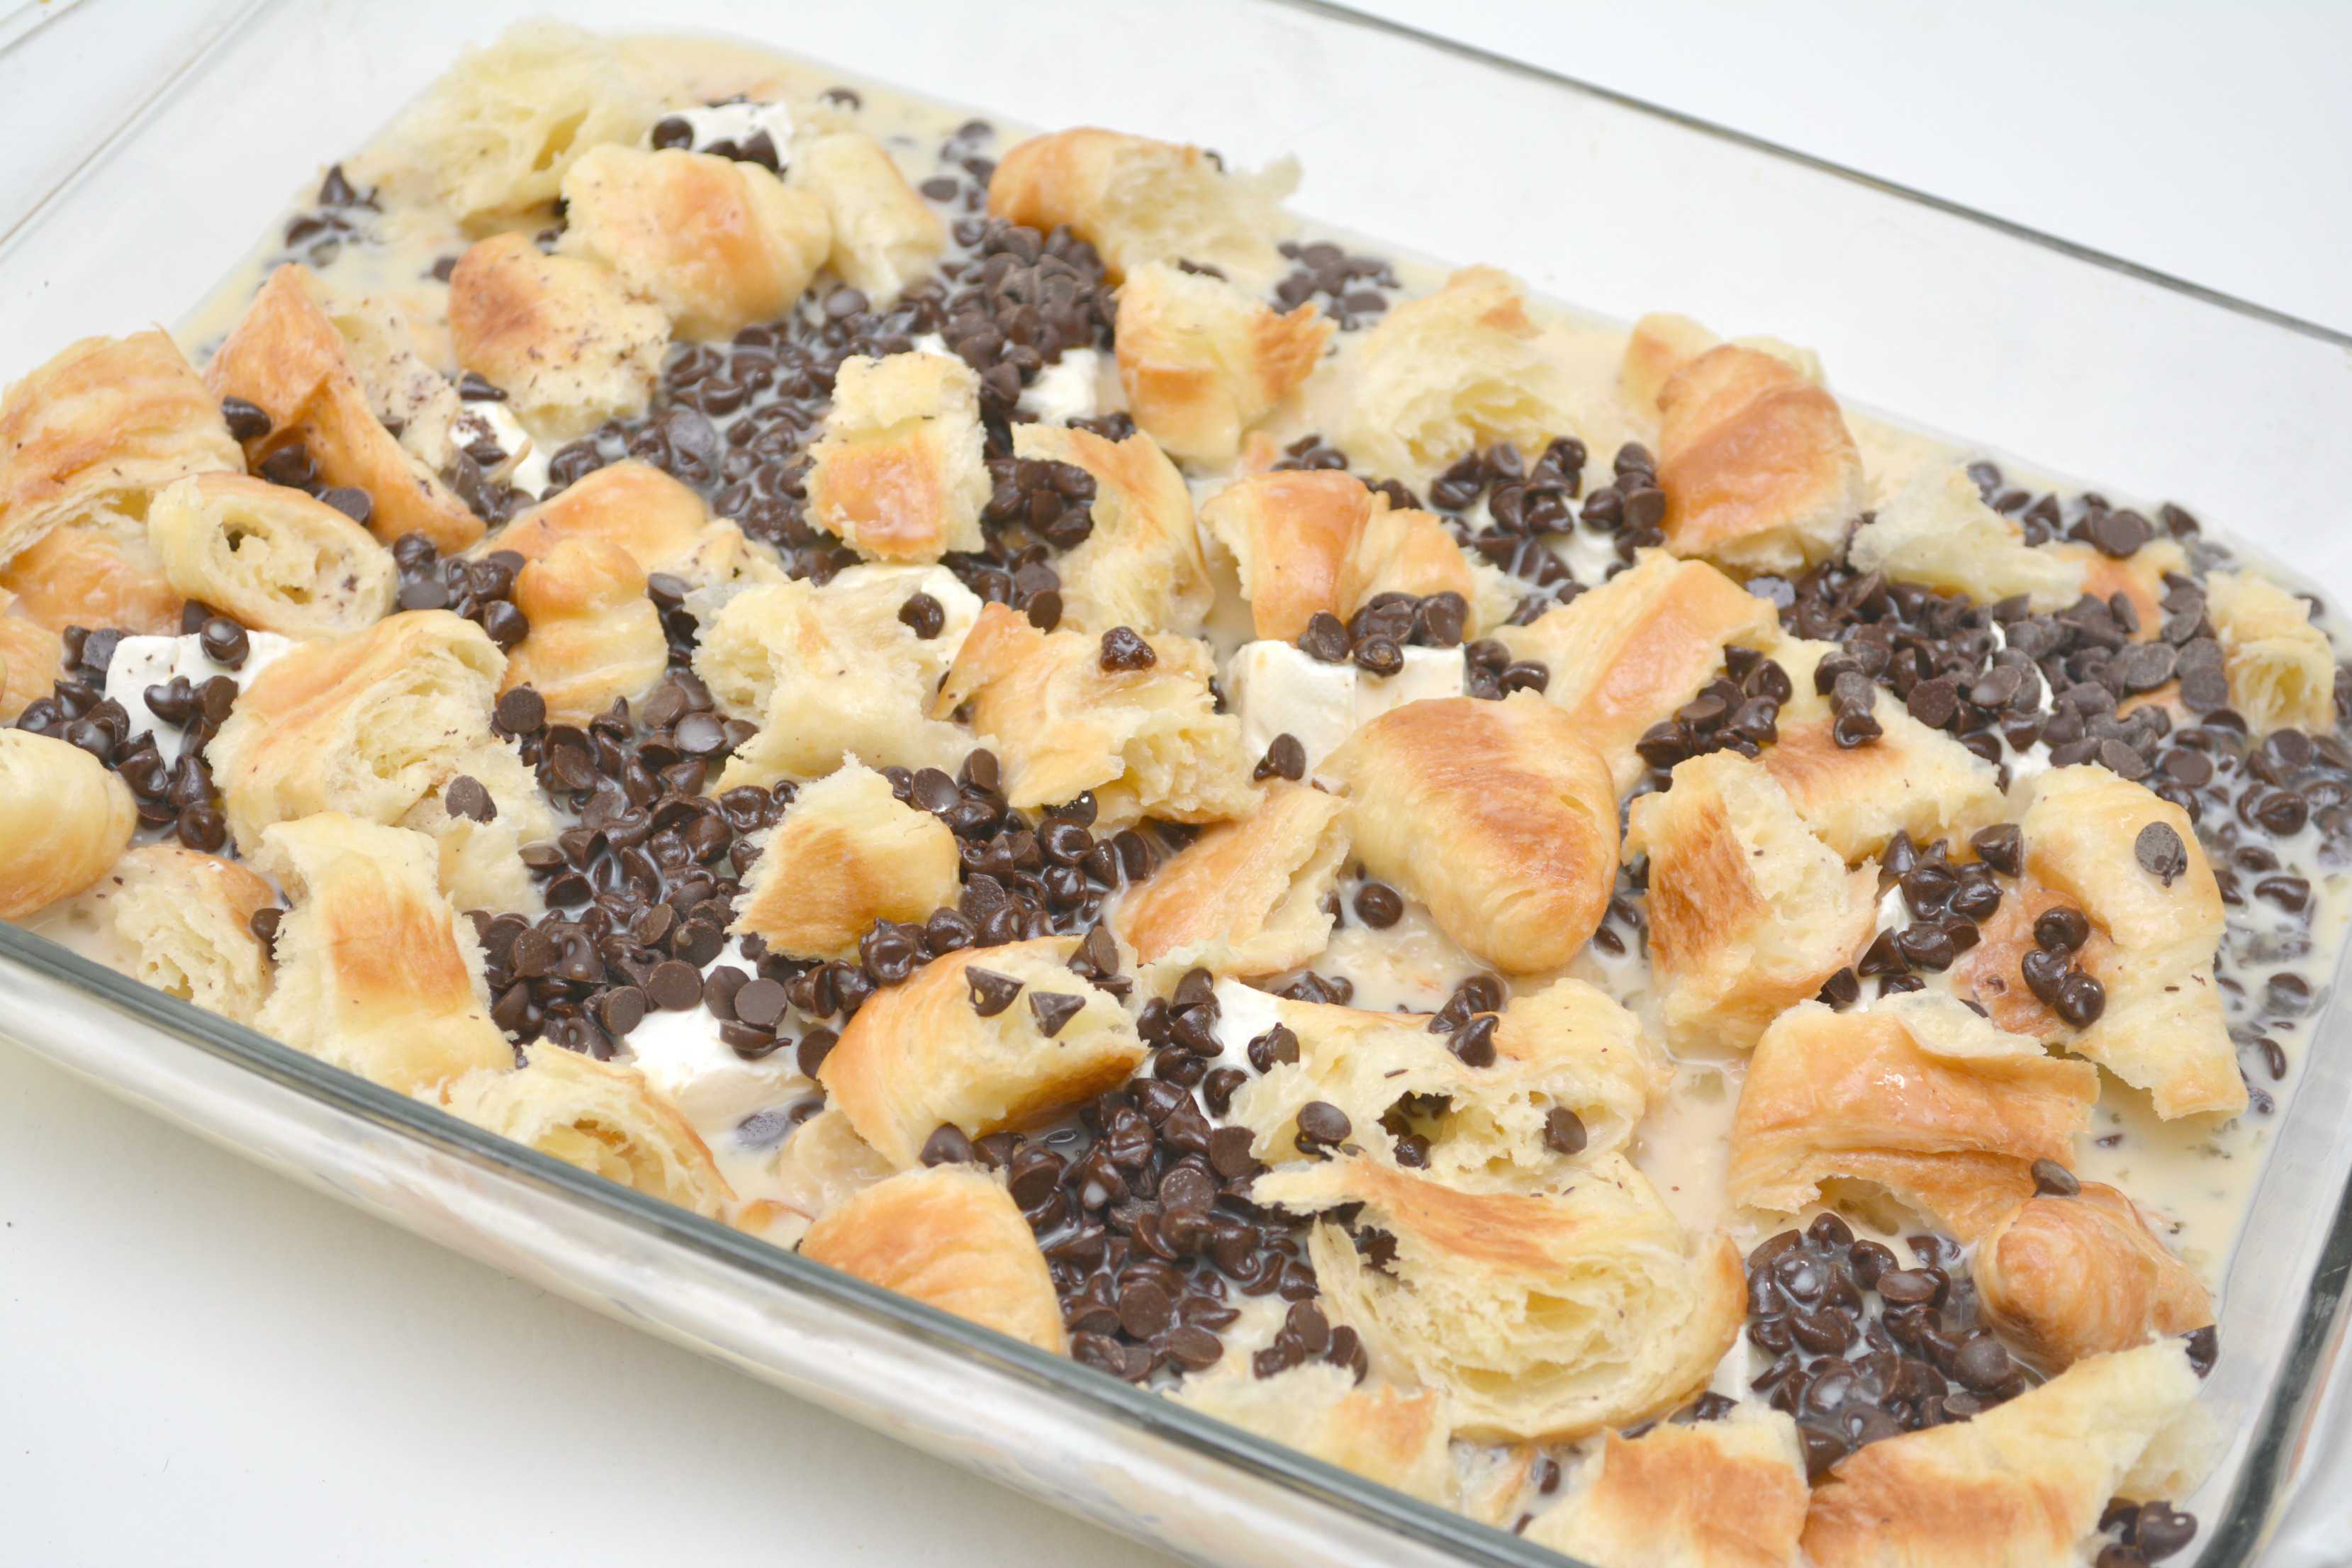 Croissants, chocolate chips and filling in a baking dish